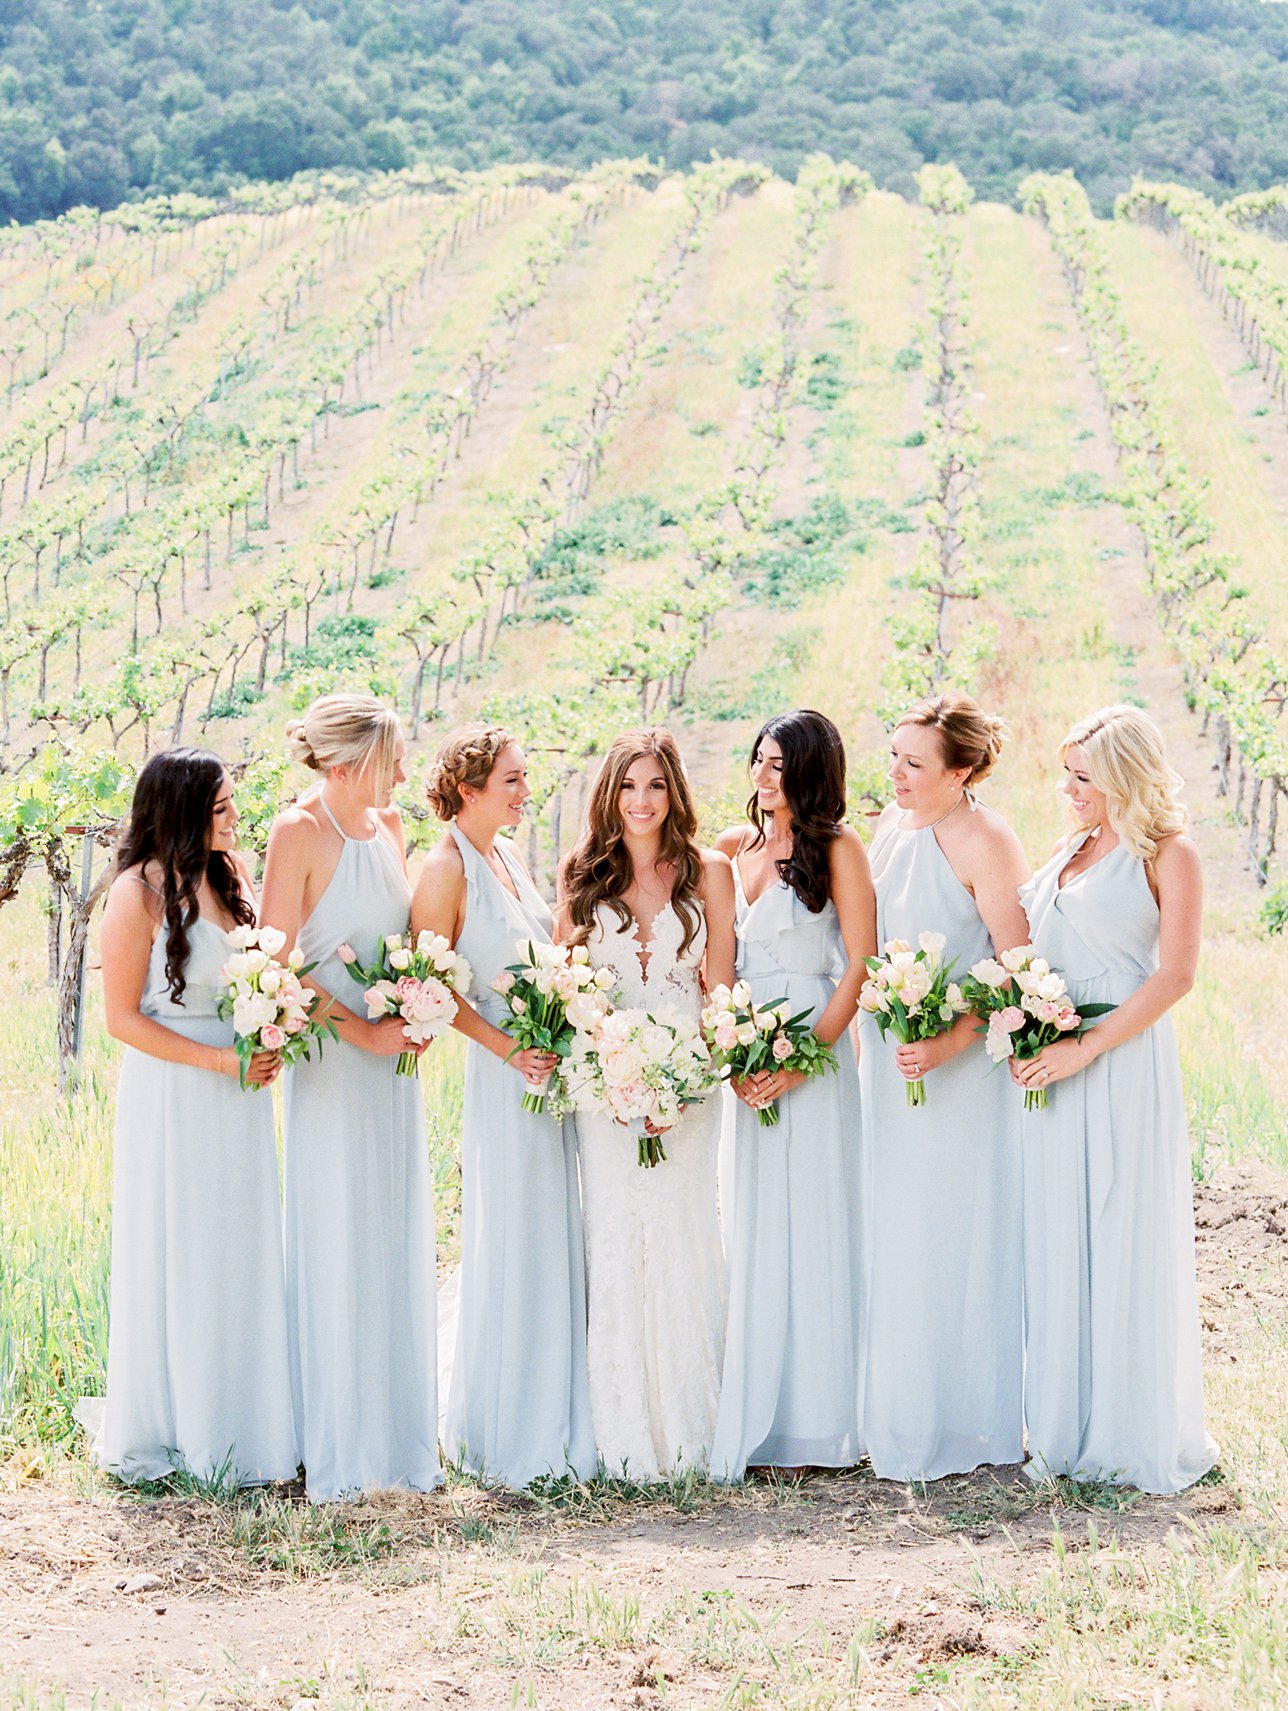 HammerSky Vineyards wedding photos - Paso Robles Wedding Photographer | Rachel Solomon Photography_9042